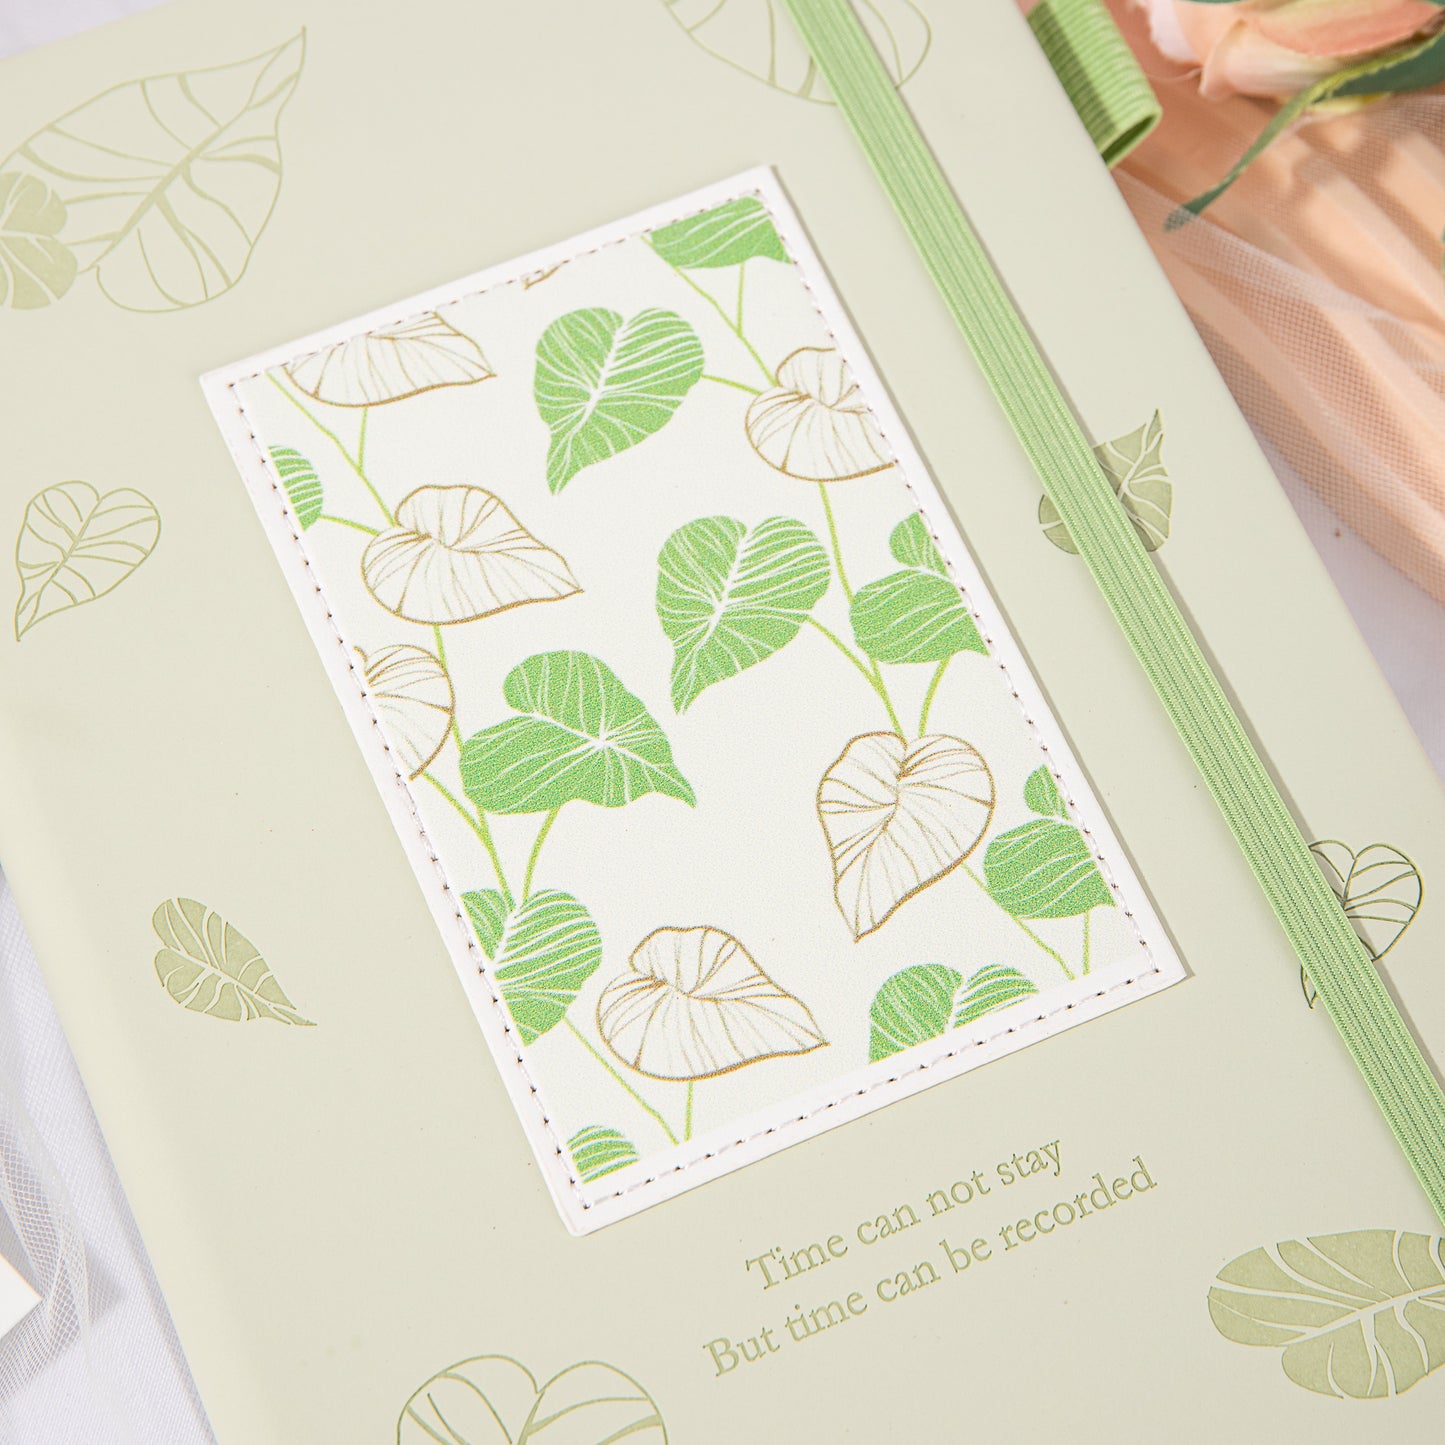 Leather Foliage Notebook - A5 - Ruled - Green